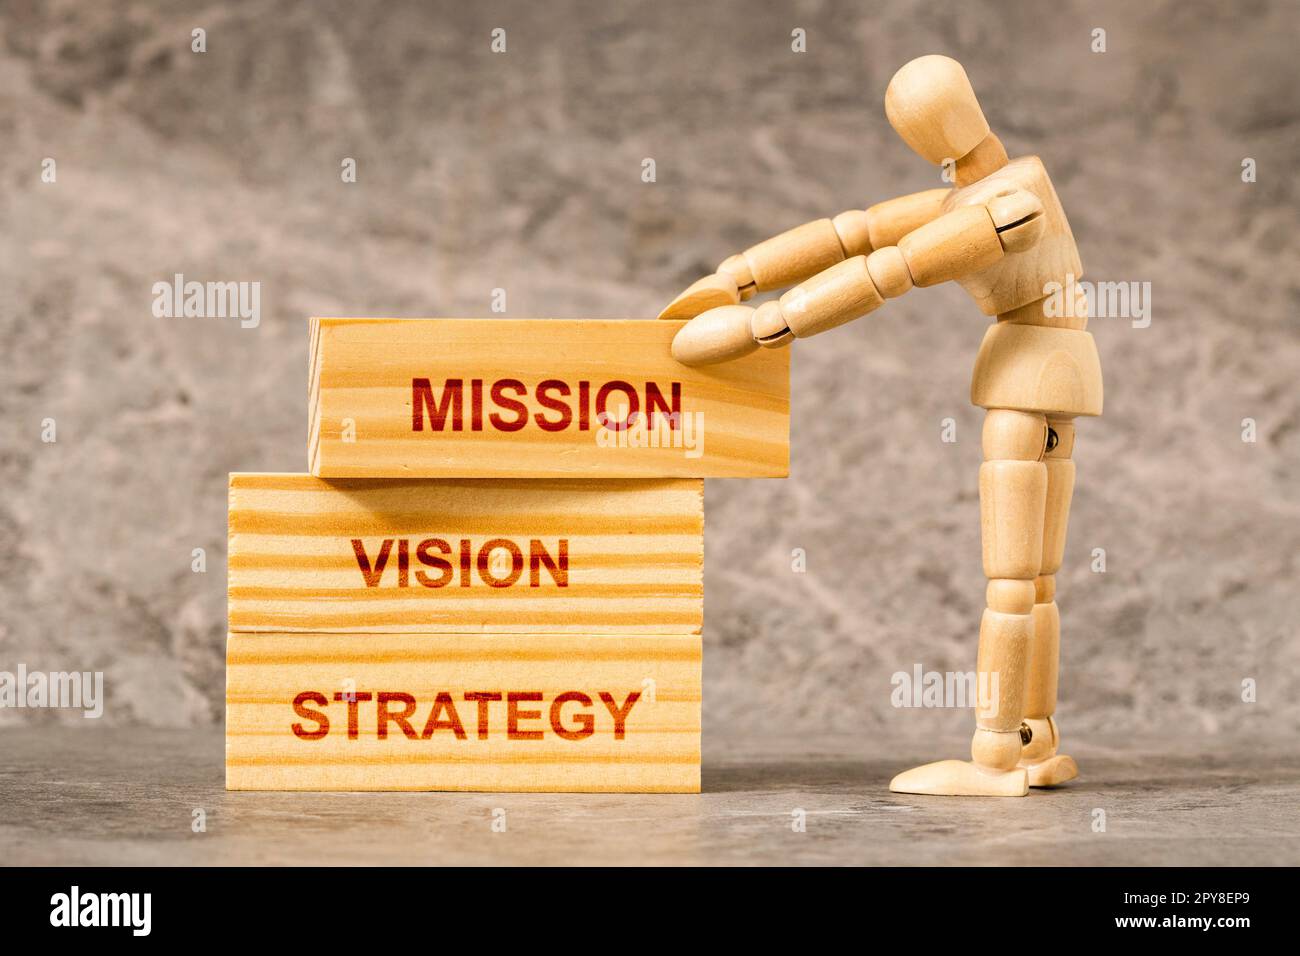 Wooden mannequin building up wooden blocks with  STRATEGY, VISION and MISSION text Stock Photo